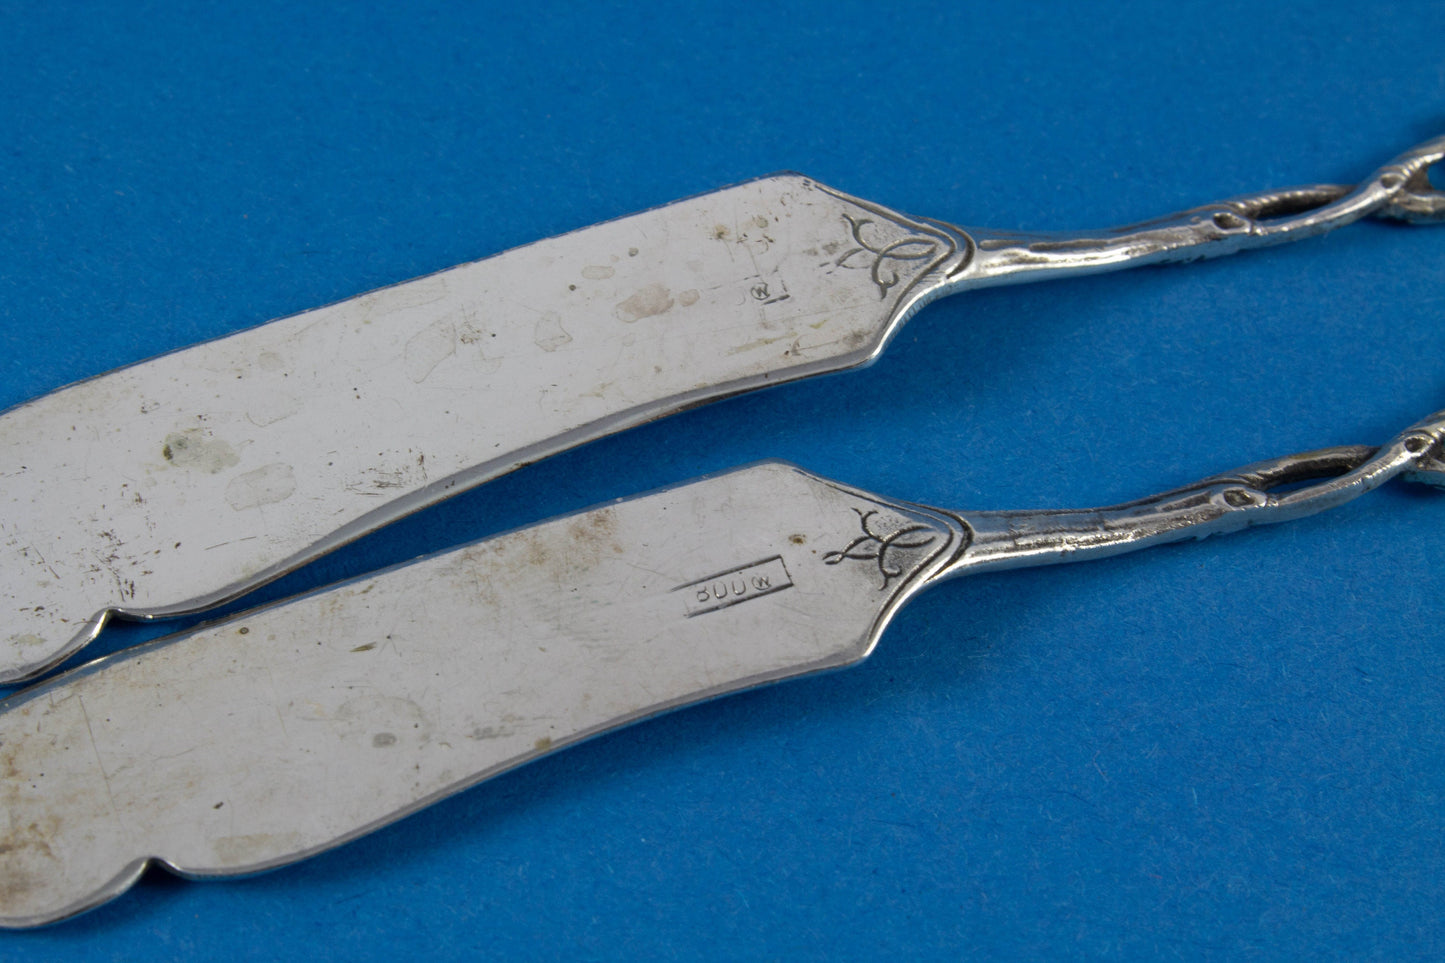 Silver Butter Knife, Cheese Knife and Skewer Rose Cutlery Set by Widmann